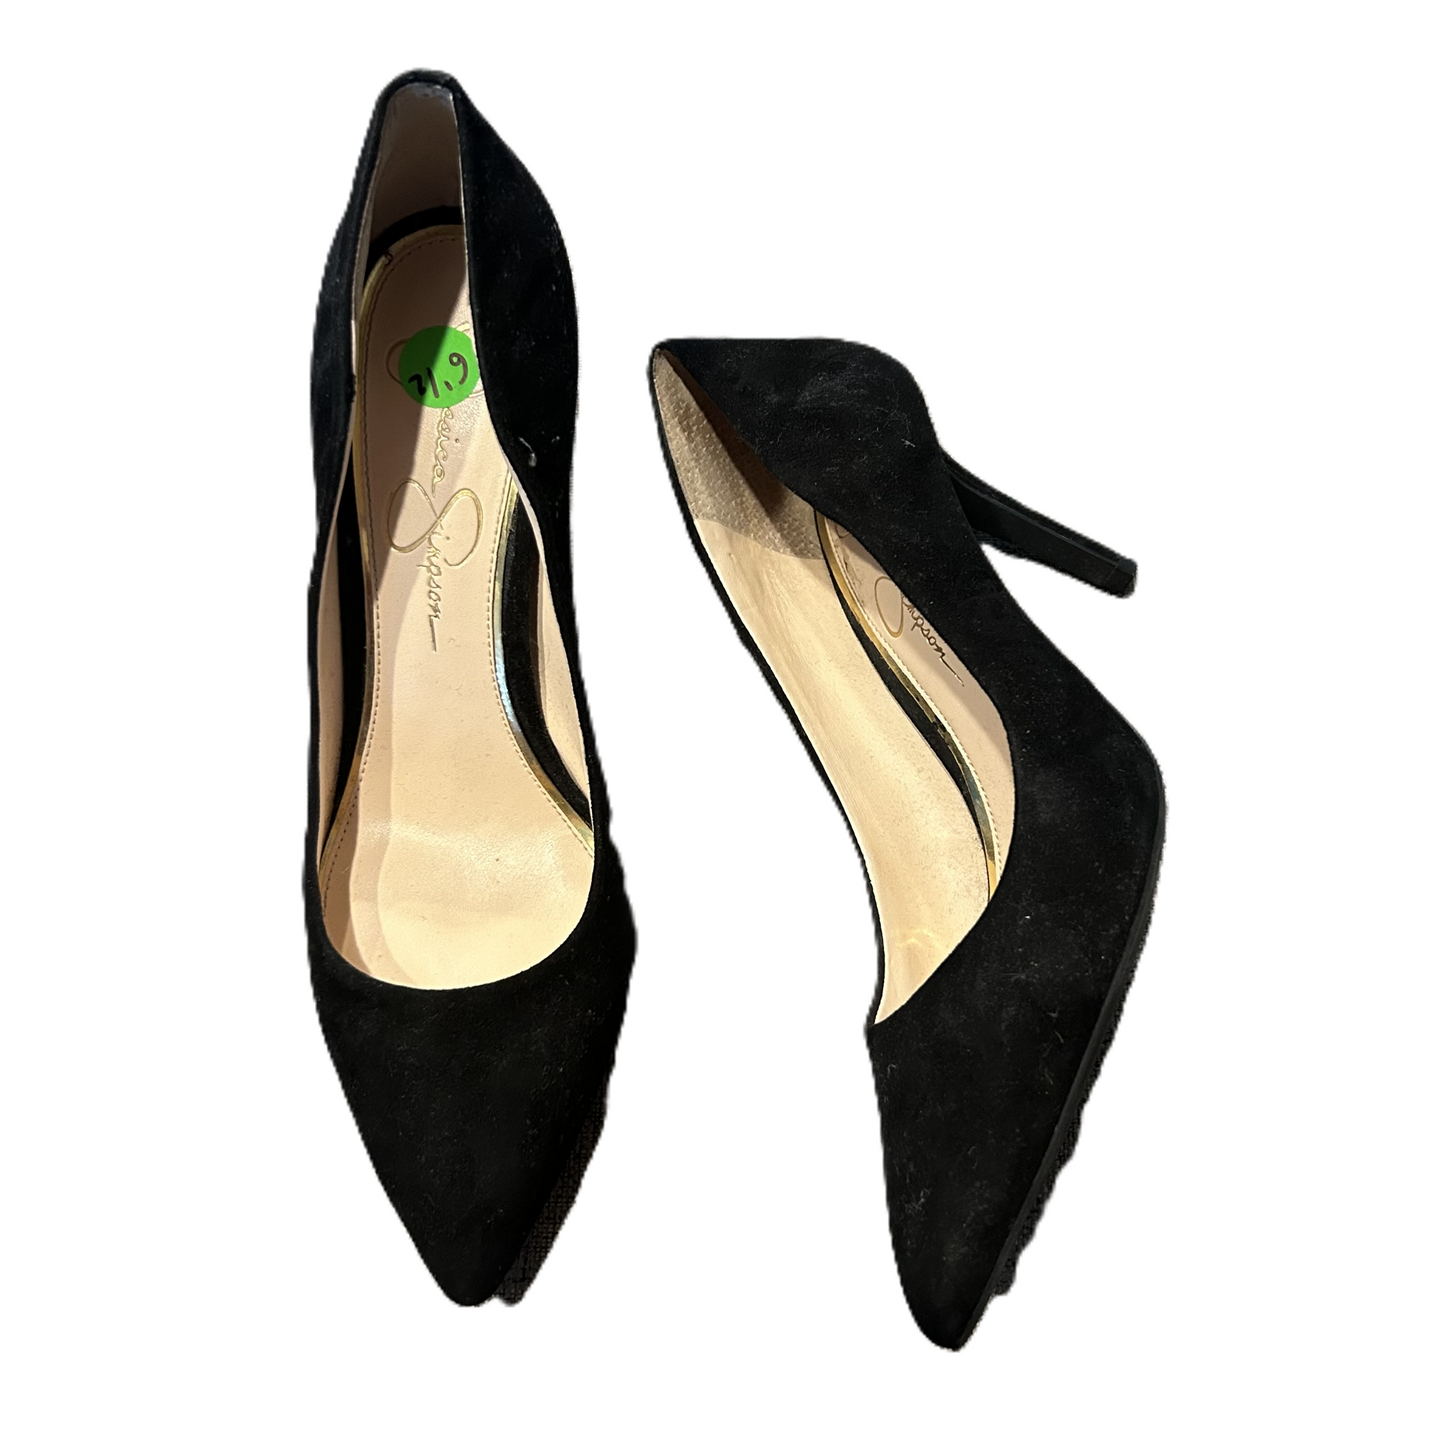 Black Shoes Heels Stiletto By Jessica Simpson, Size: 6.5